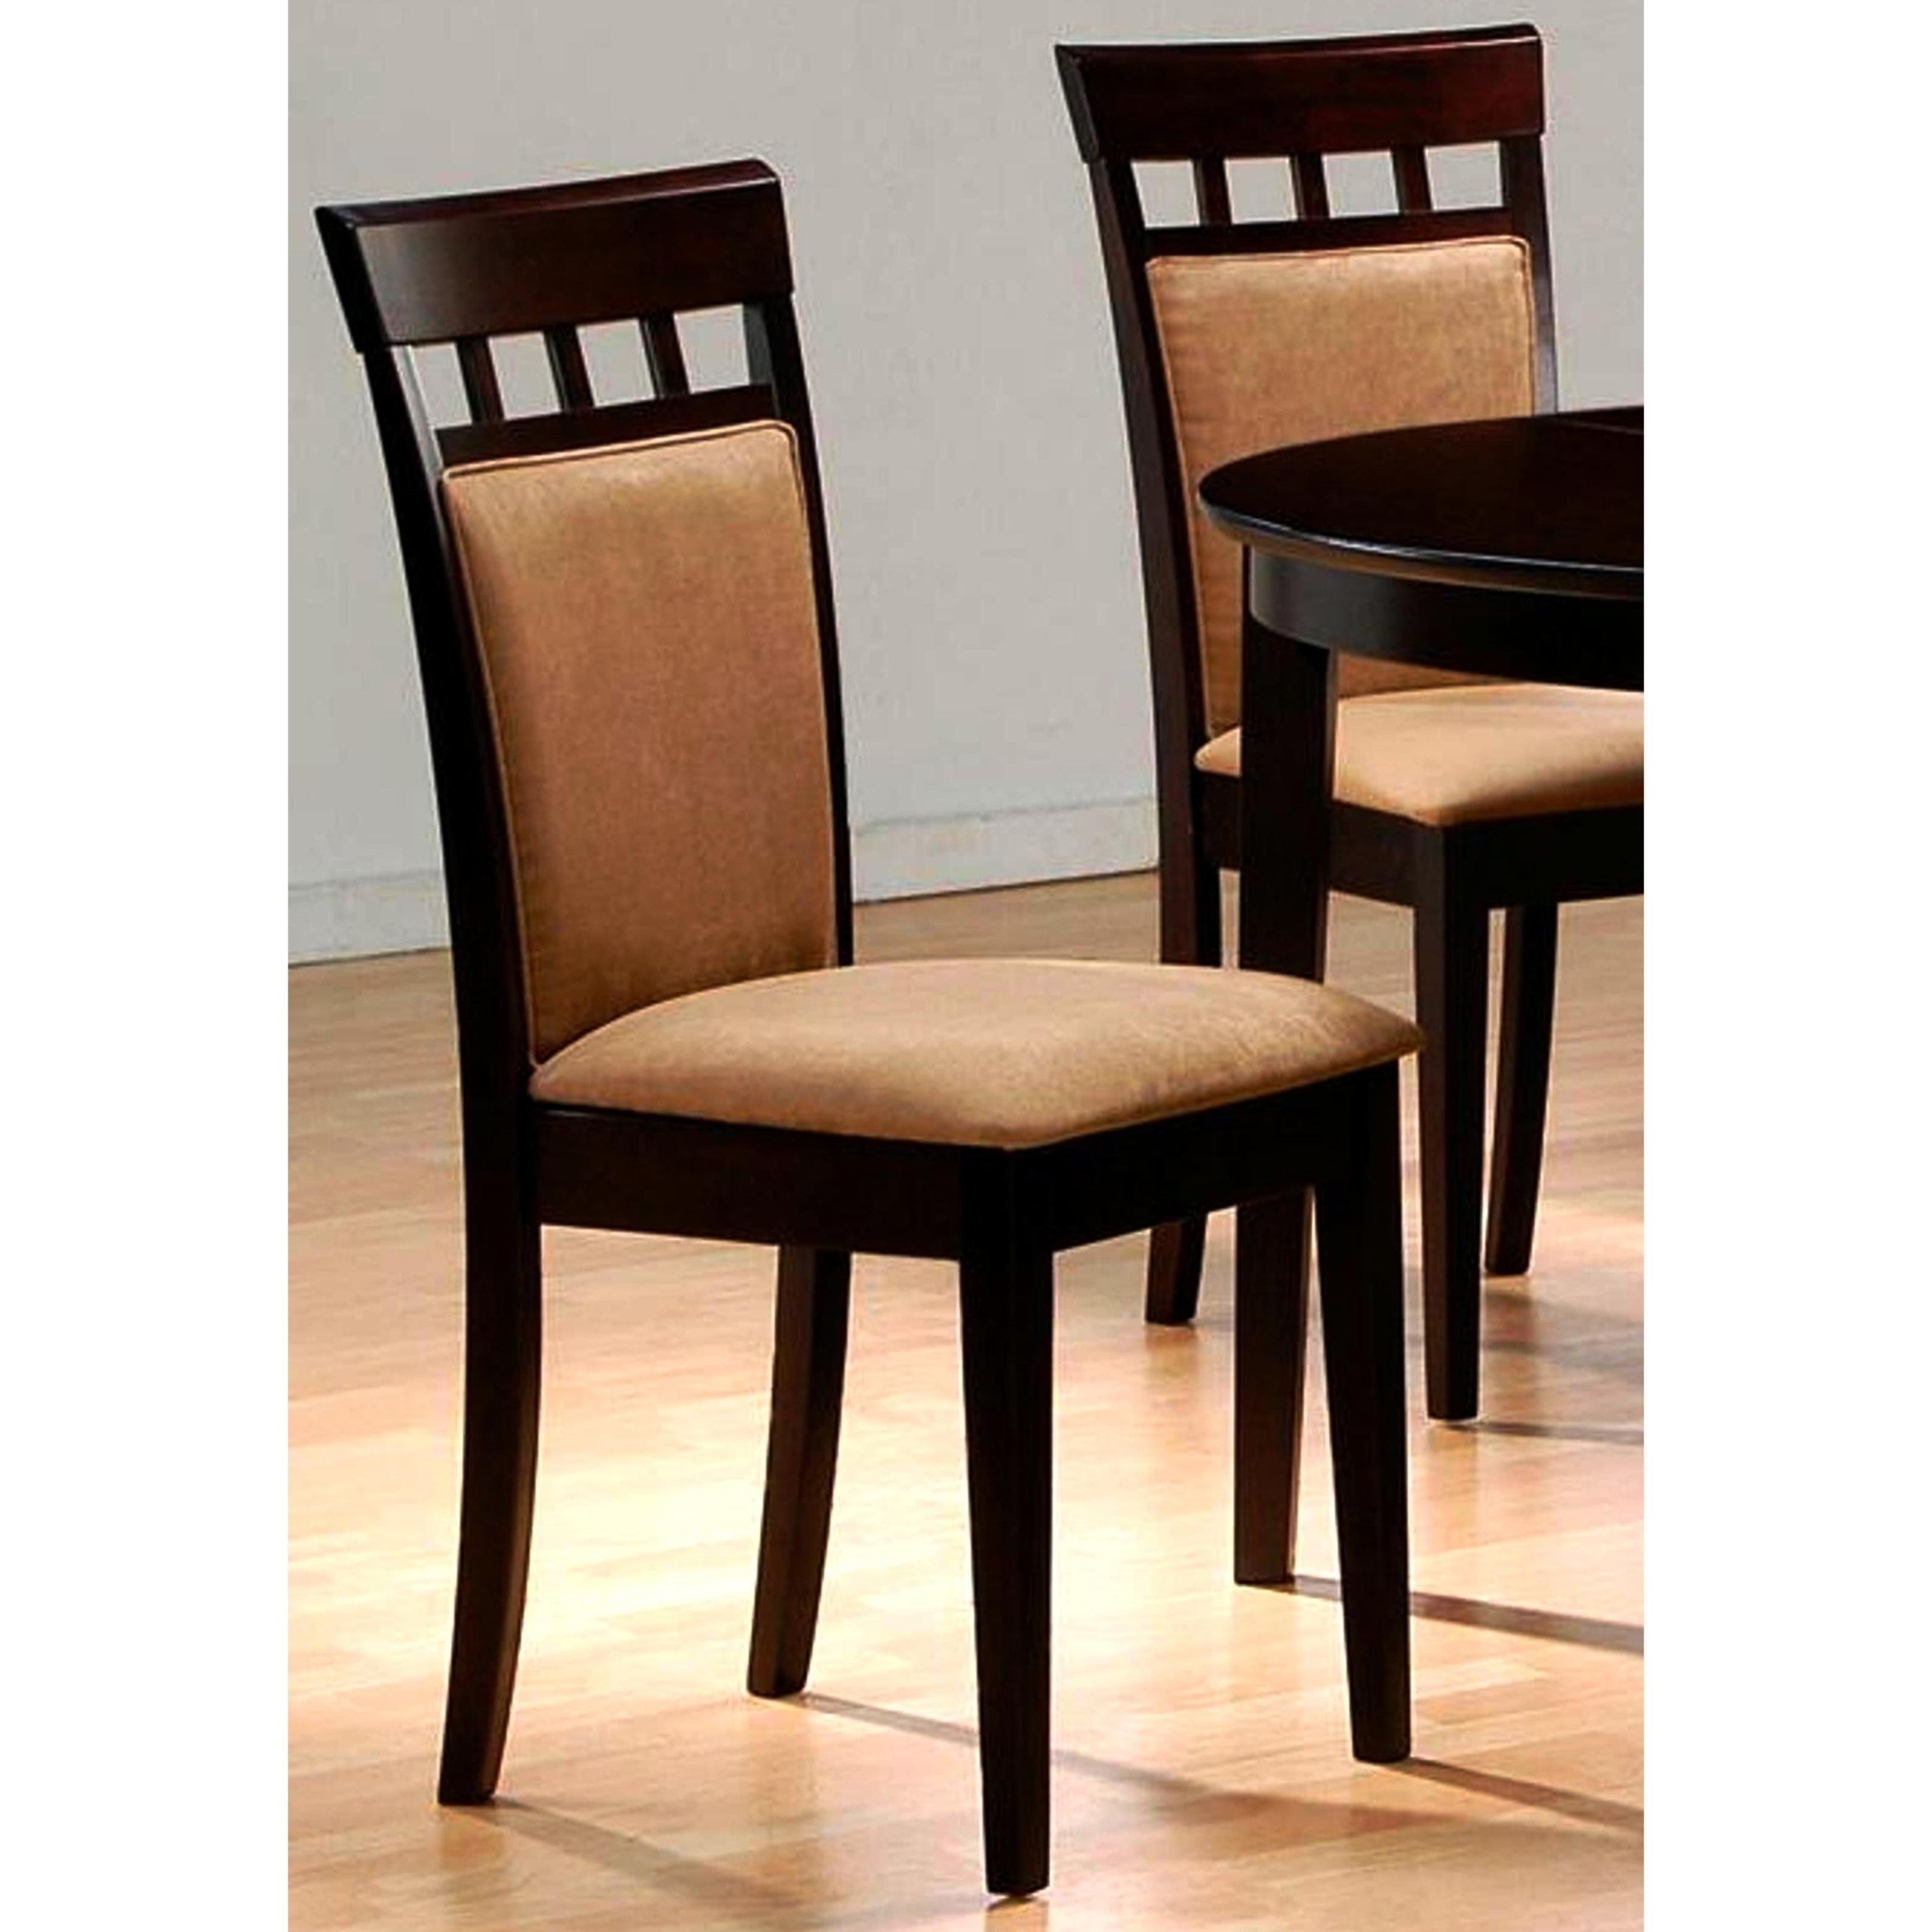 Set of 2 Contemporary Style Cappuccino Finish Dining Chairs